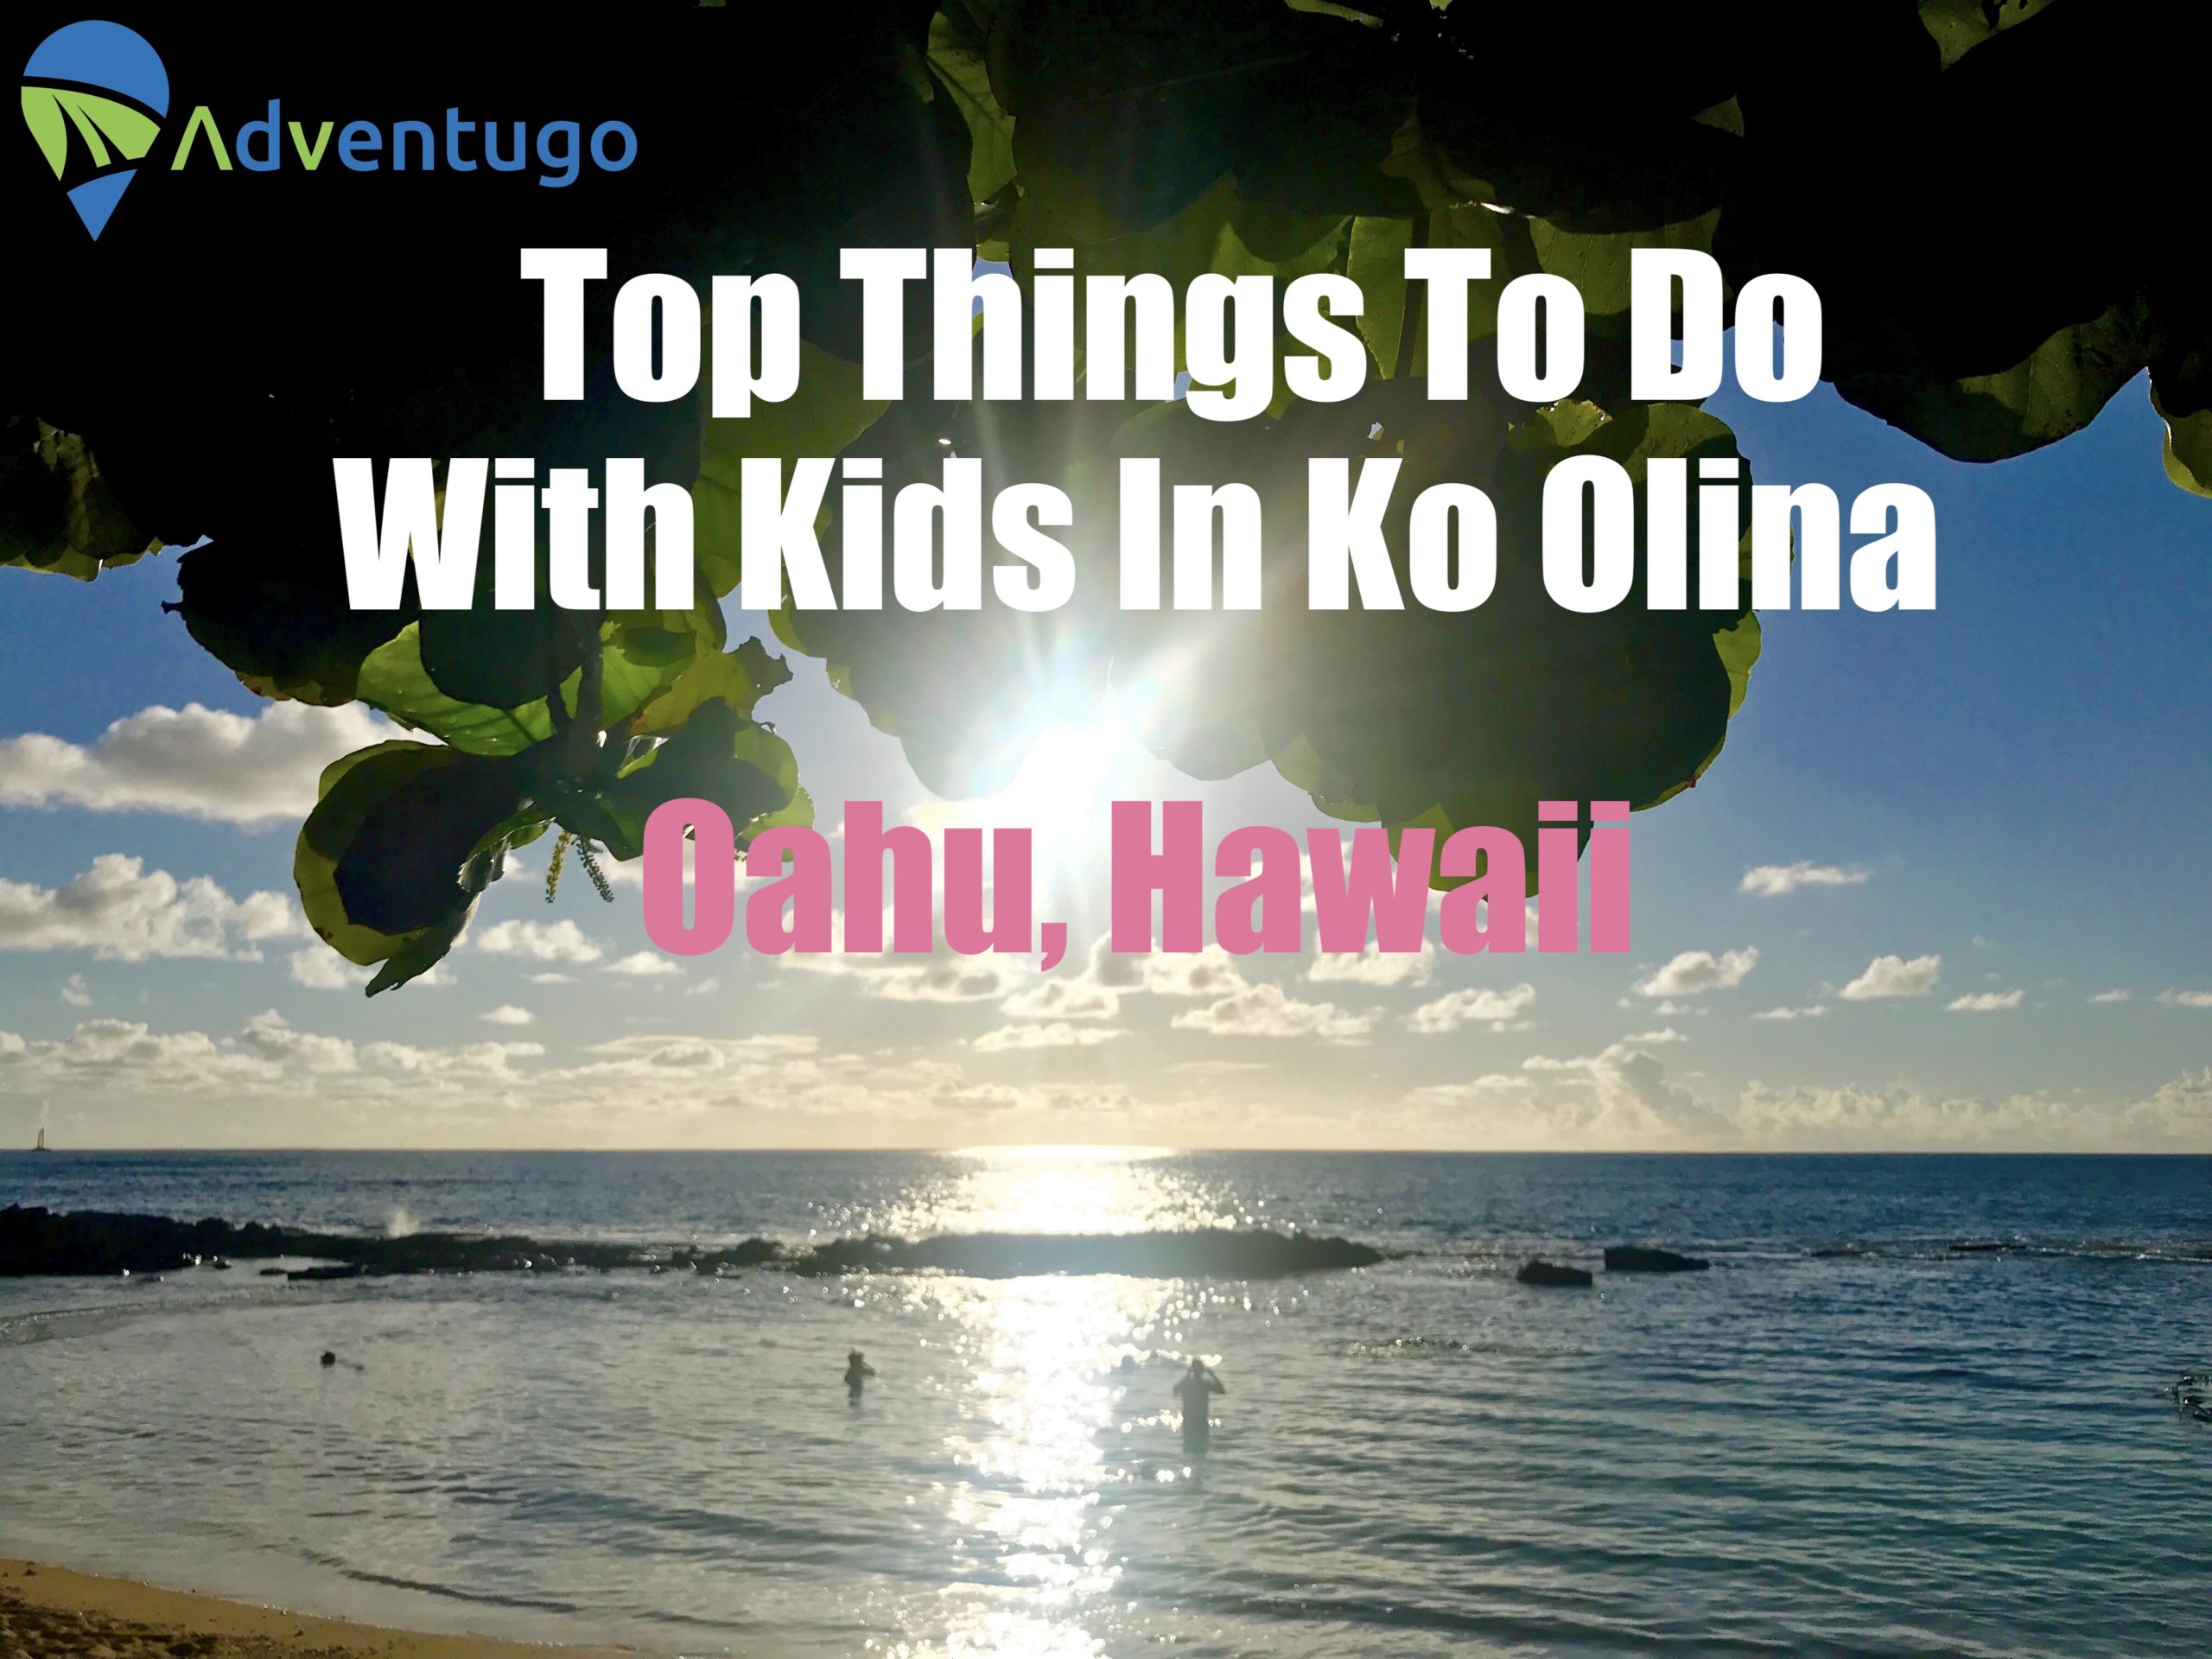 Top Things to do with kids in Ko Olina, Oahu